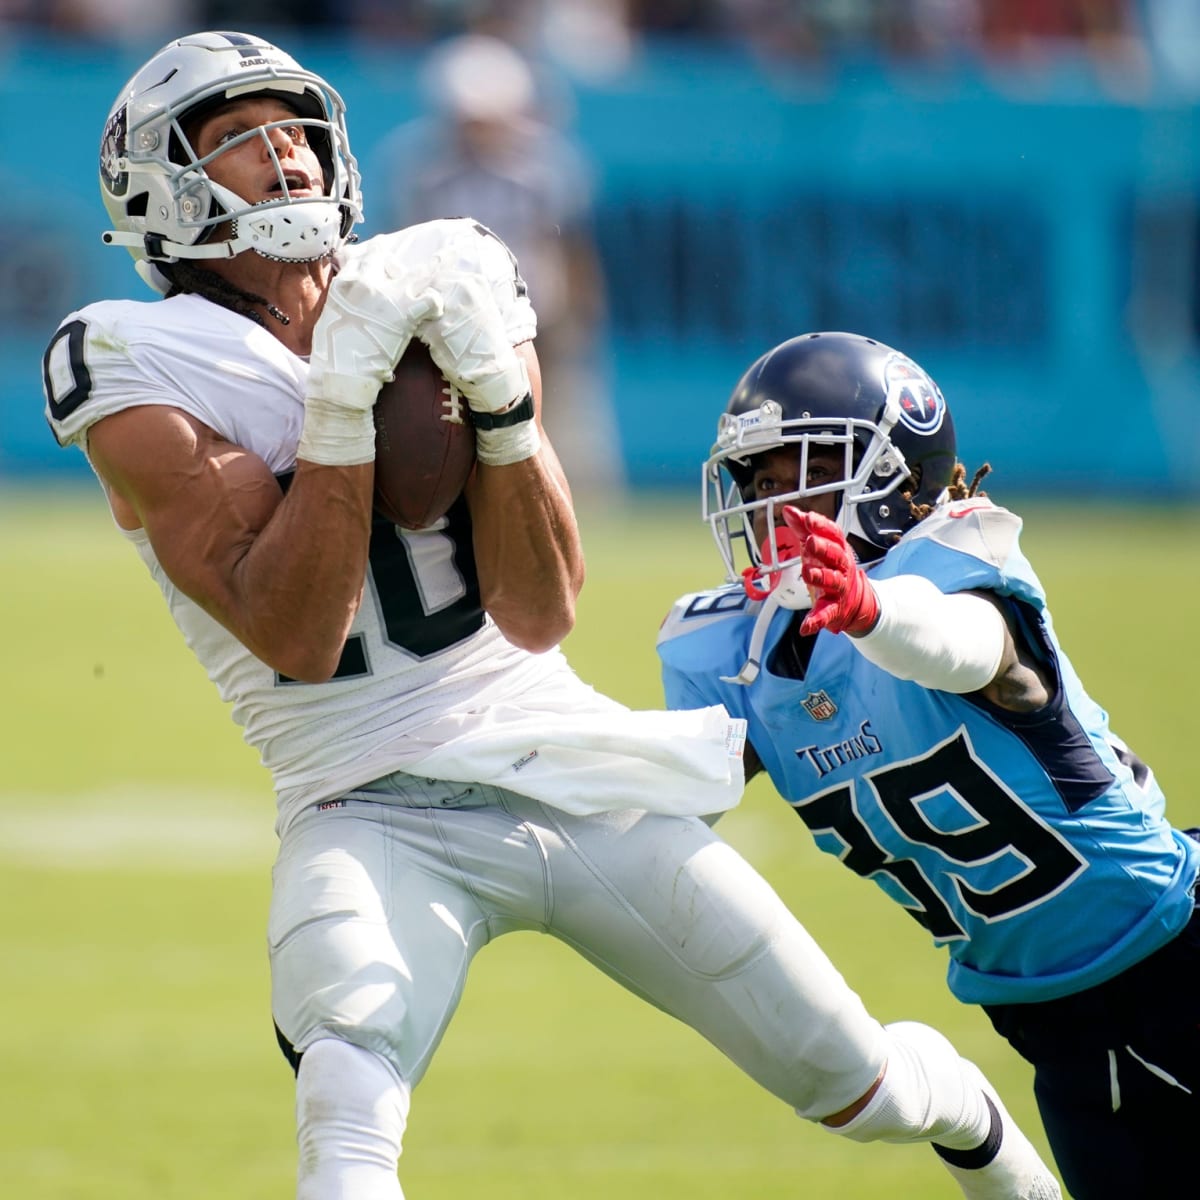 Raiders' wide receiver Mack Hollins ready to make new history